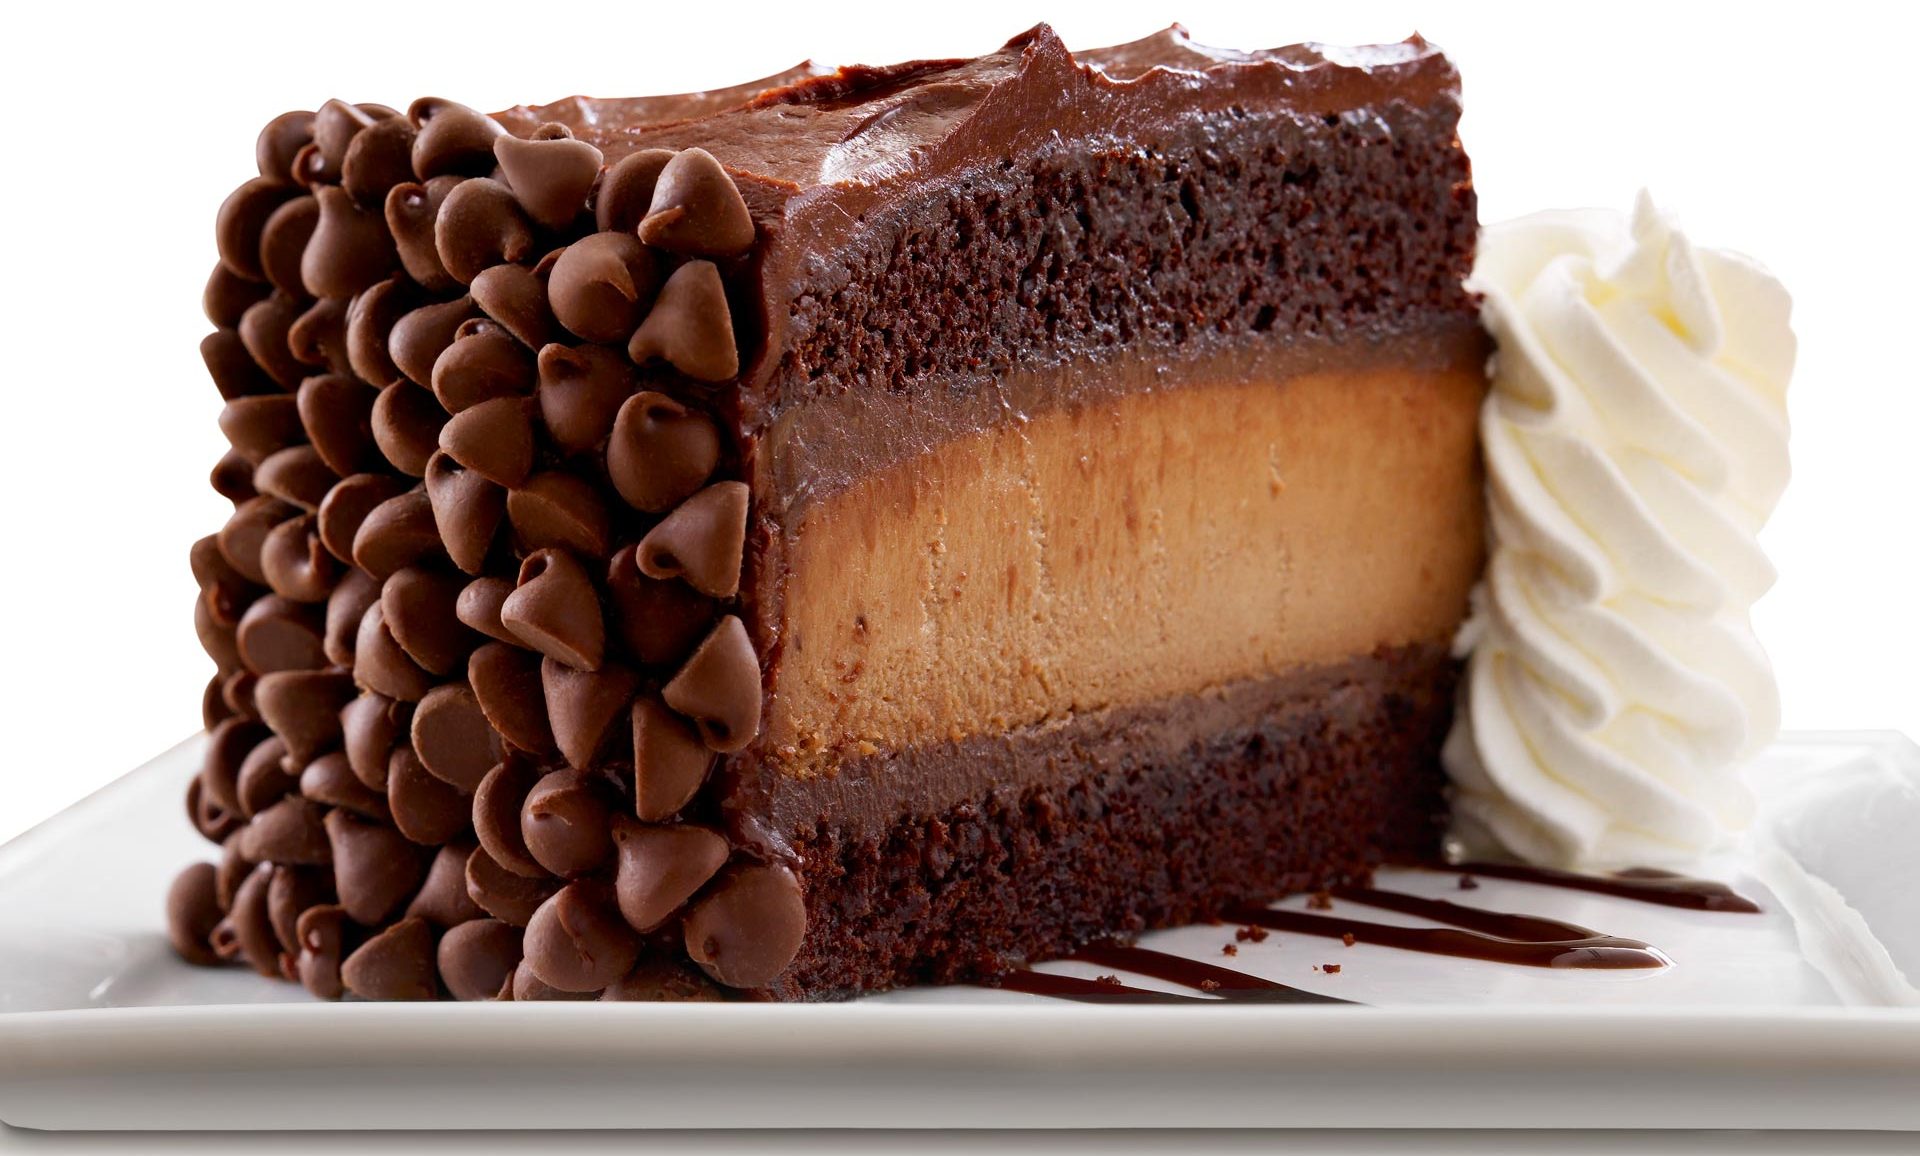 Halloween freebies and deals – The Cheesecake Factory Hershey Bar